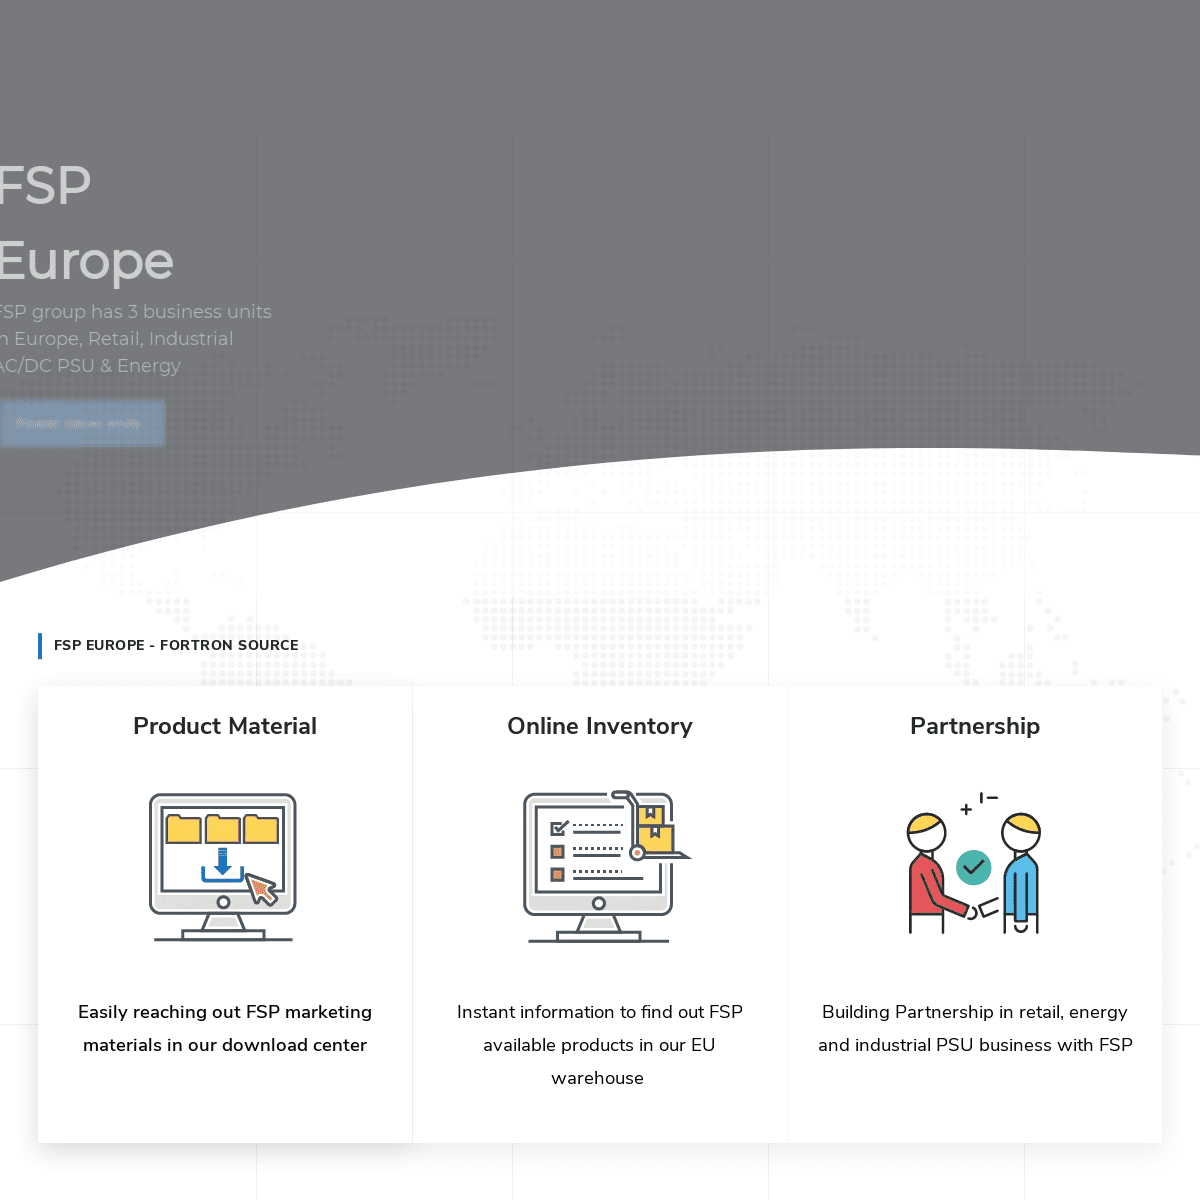 A complete backup of https://fsp-europe.com